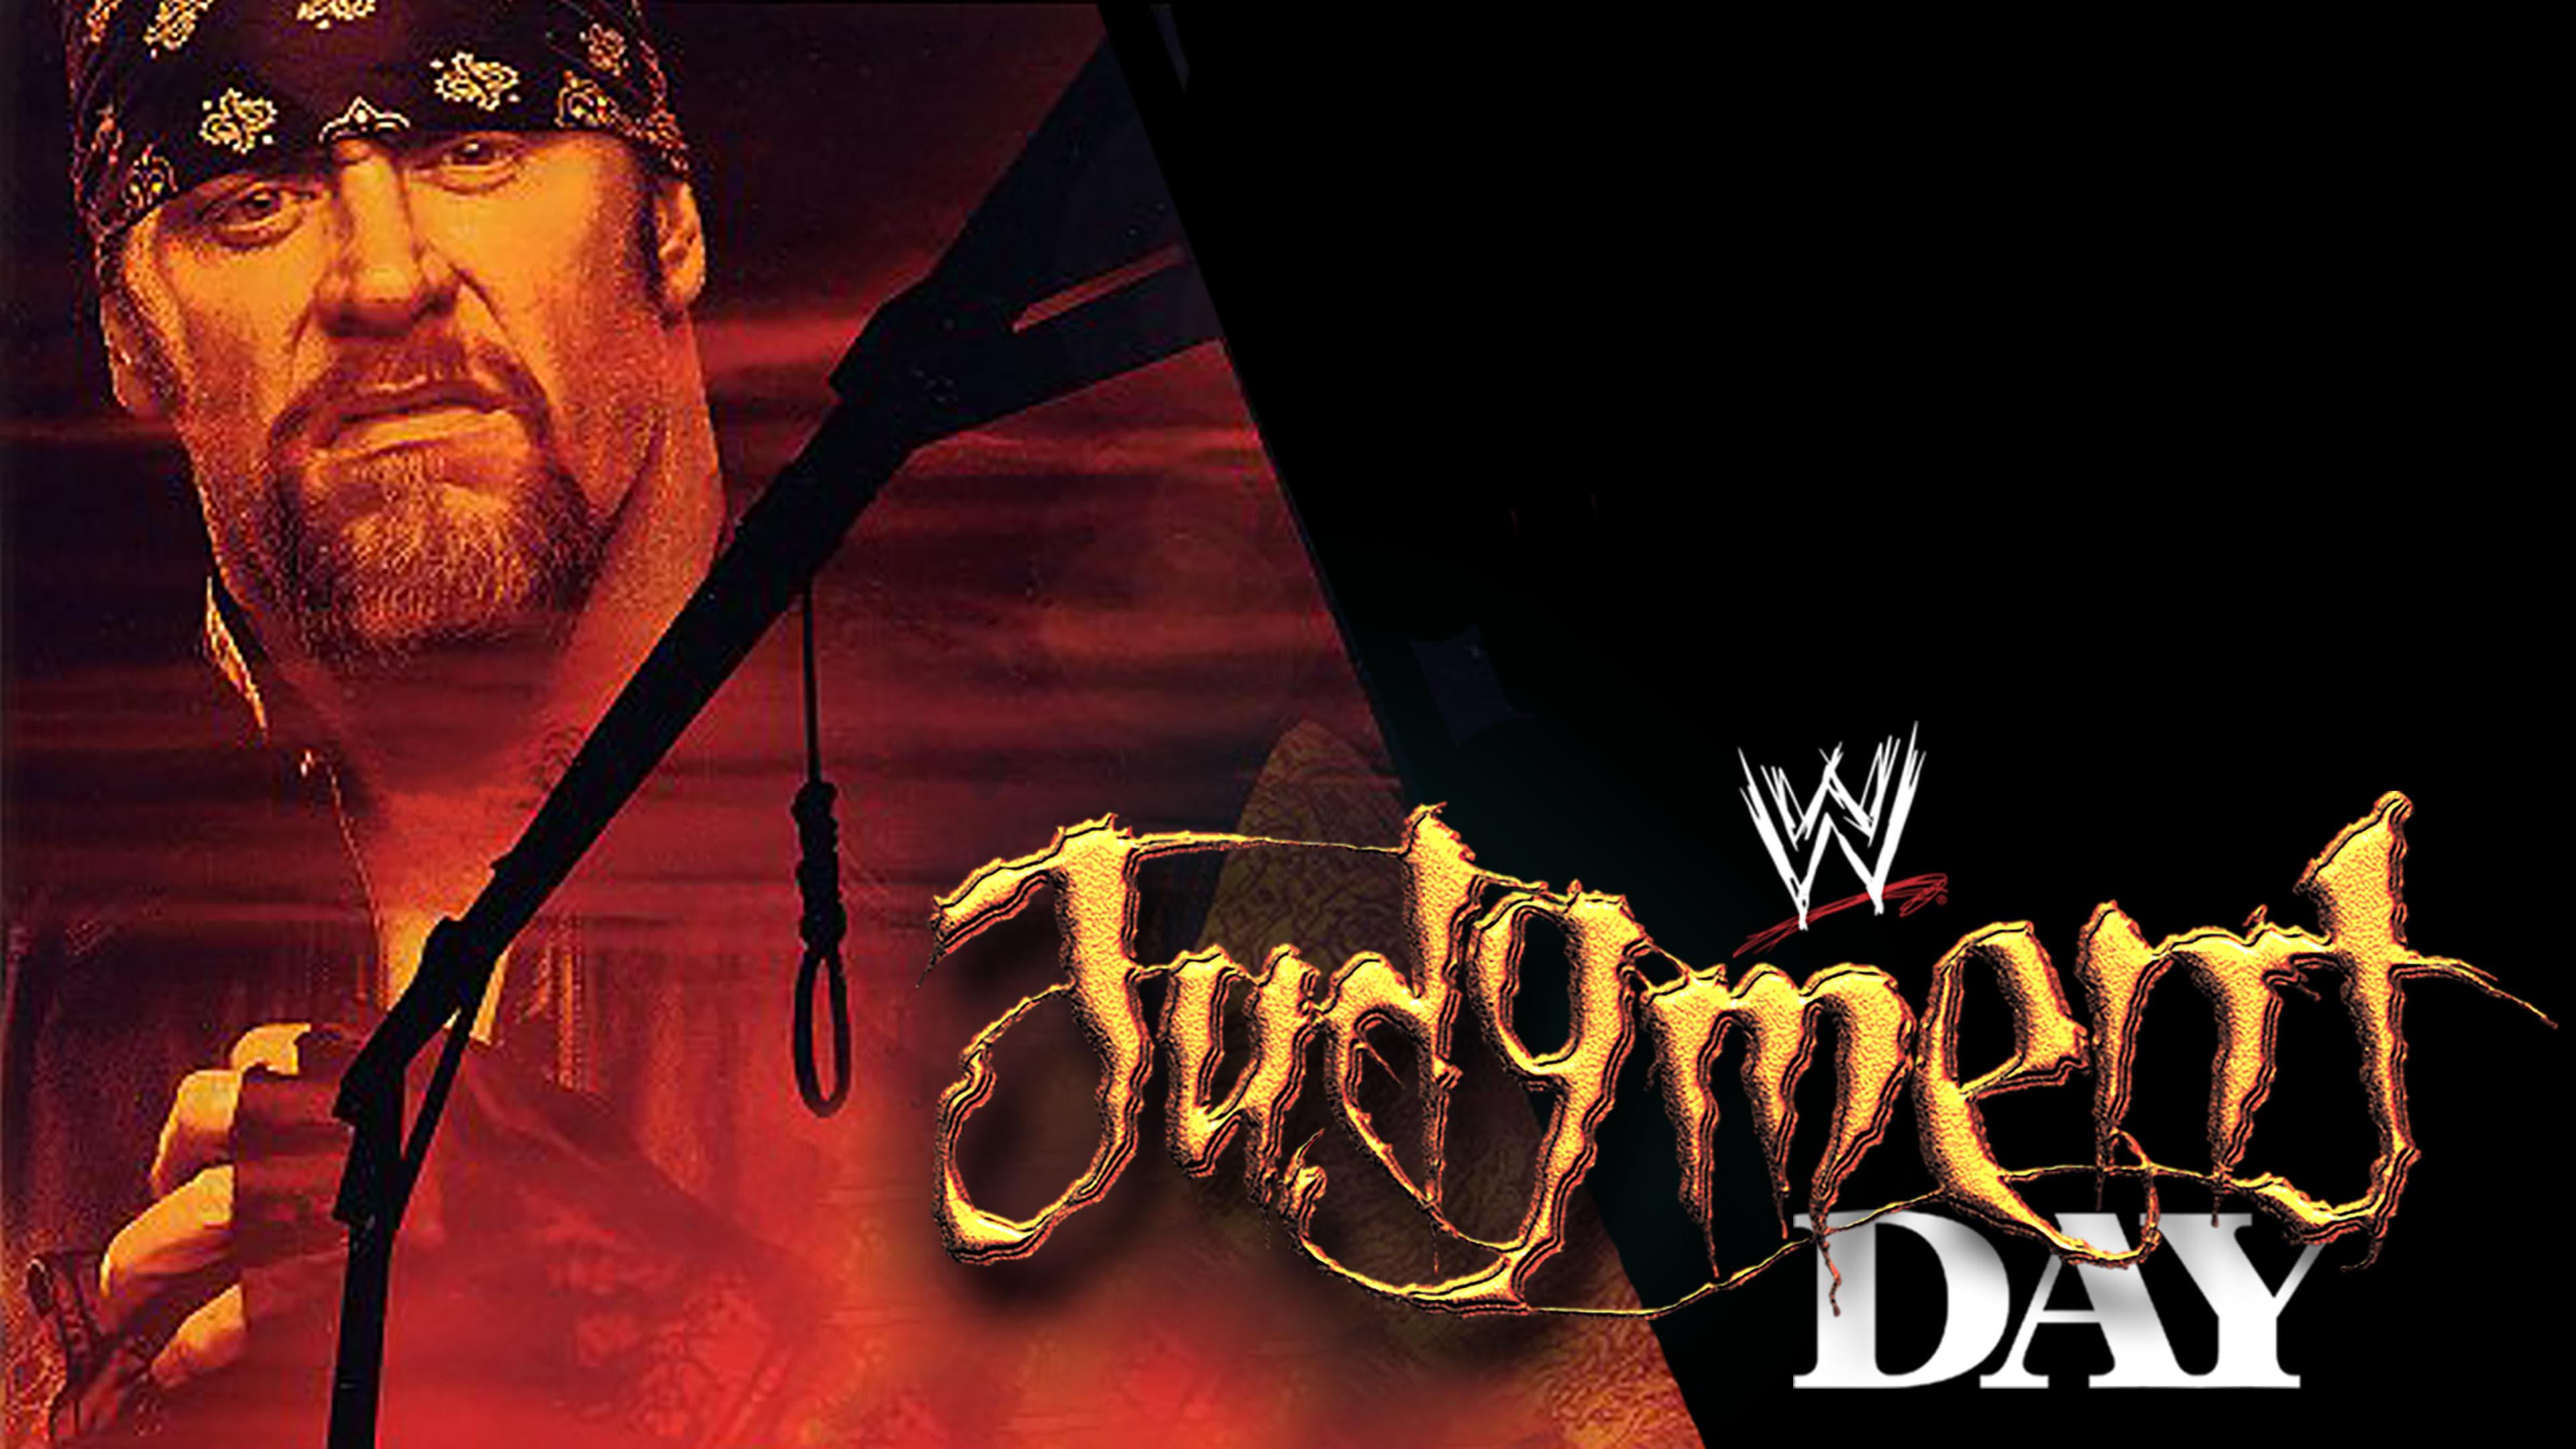 WWE Judgment Day 2002 backdrop